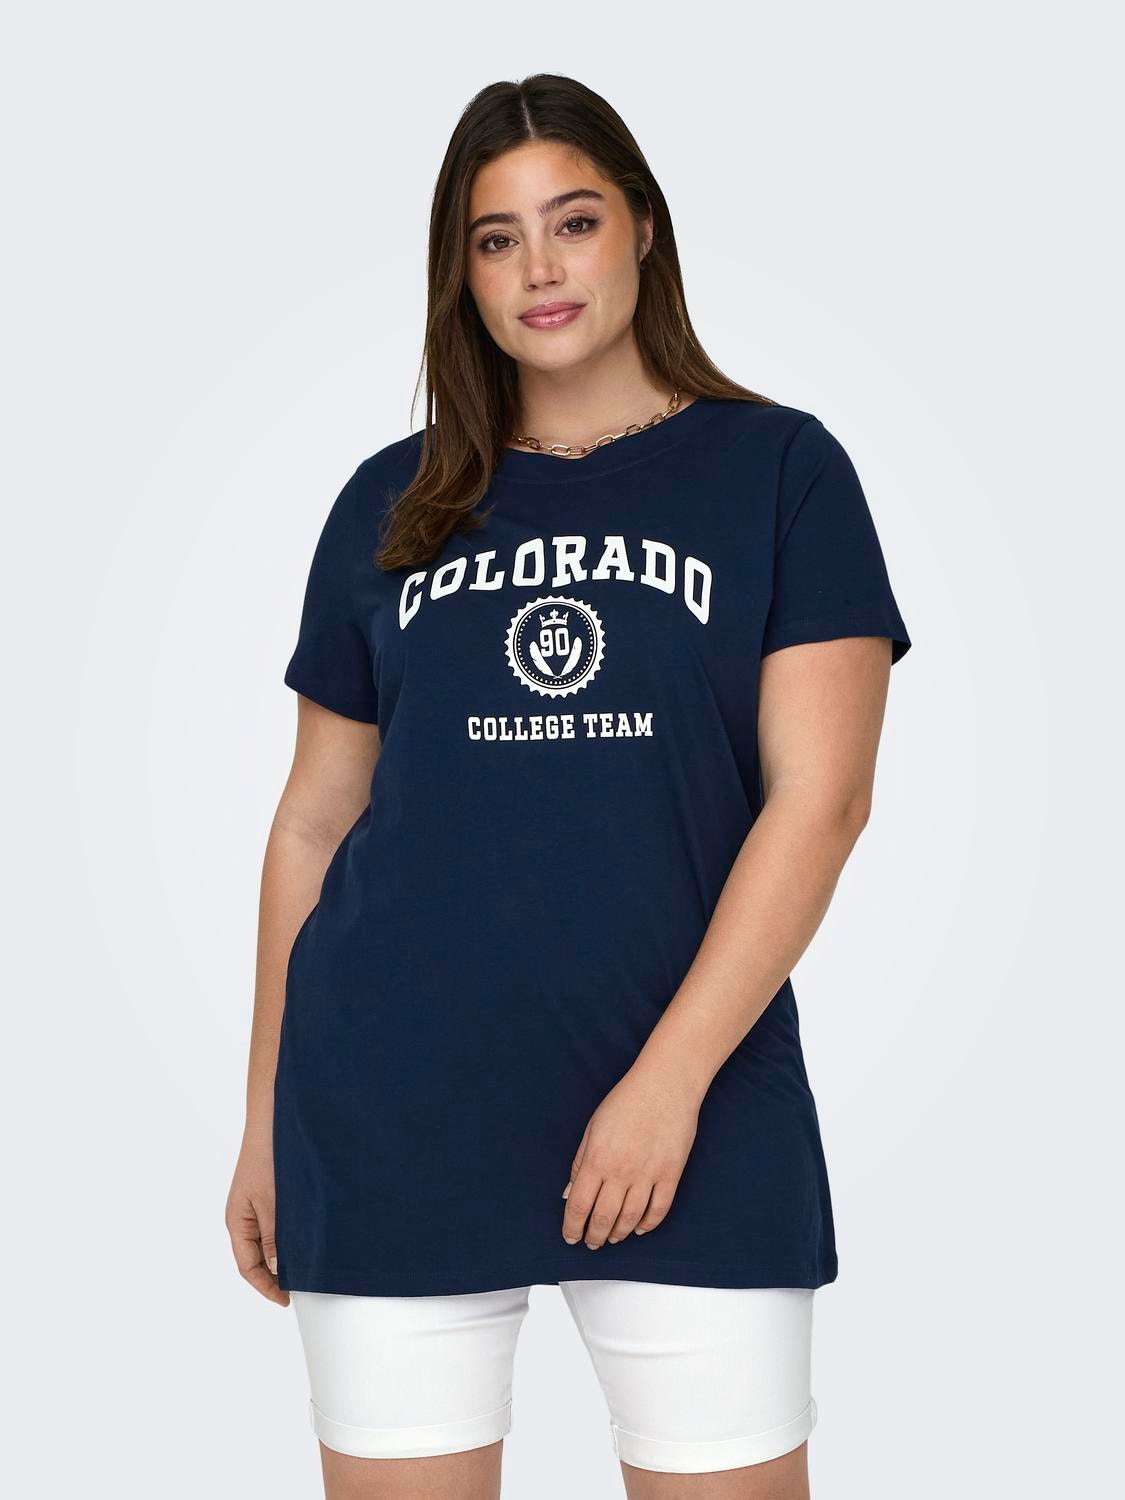 ONLY Long Line Fit O-ringning T-shirt -Naval Academy - 15320634